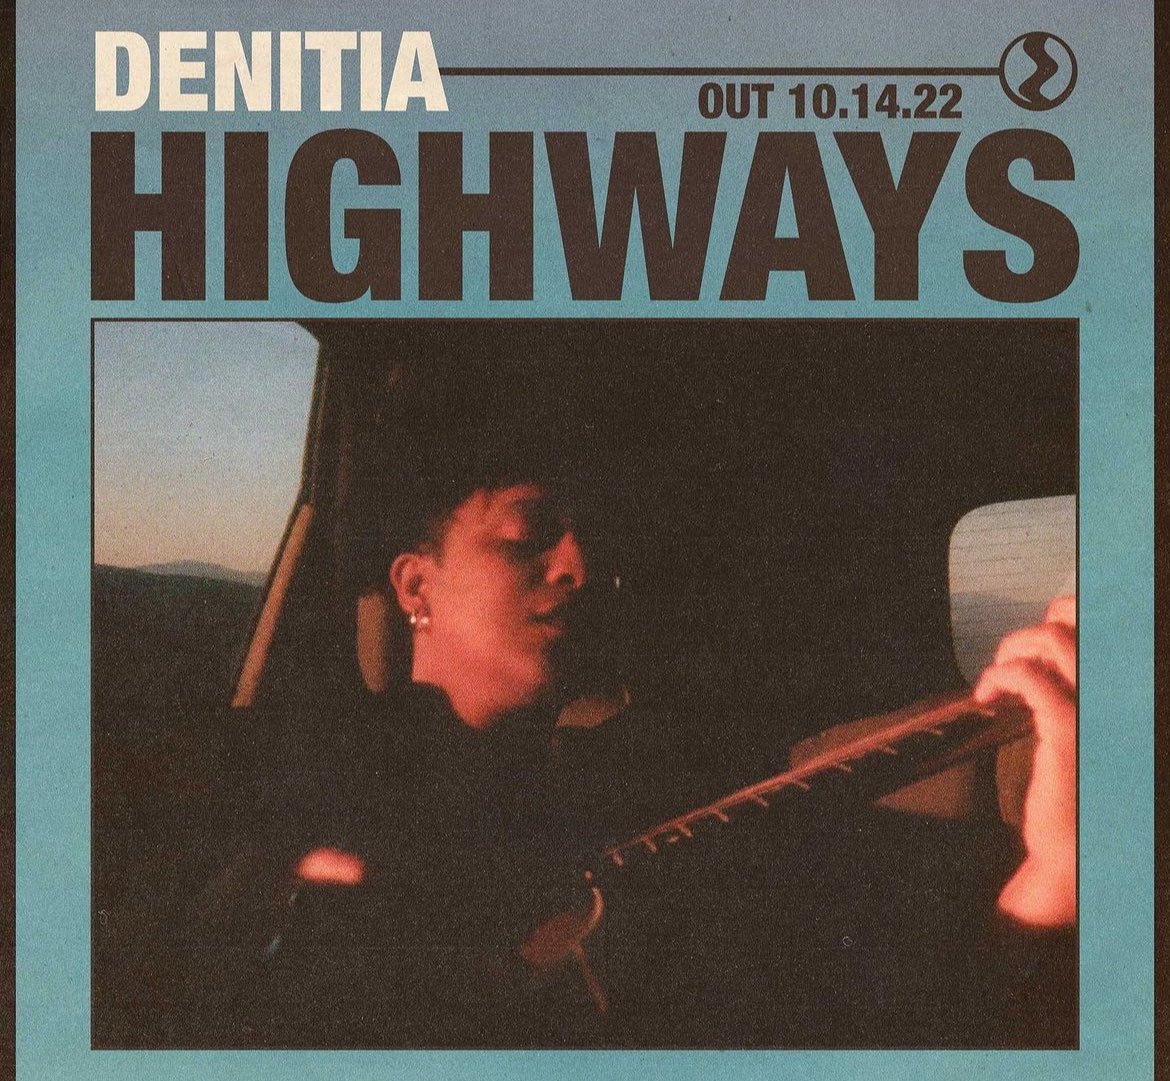 A thread of Black Artists giving #TracyChapman vibes that today’s music industry can gladly support… First up, Denitia “Highways” @denitiadenitia youtu.be/LTaoVF6bFjw?si… @BlackOpry @colormecntry